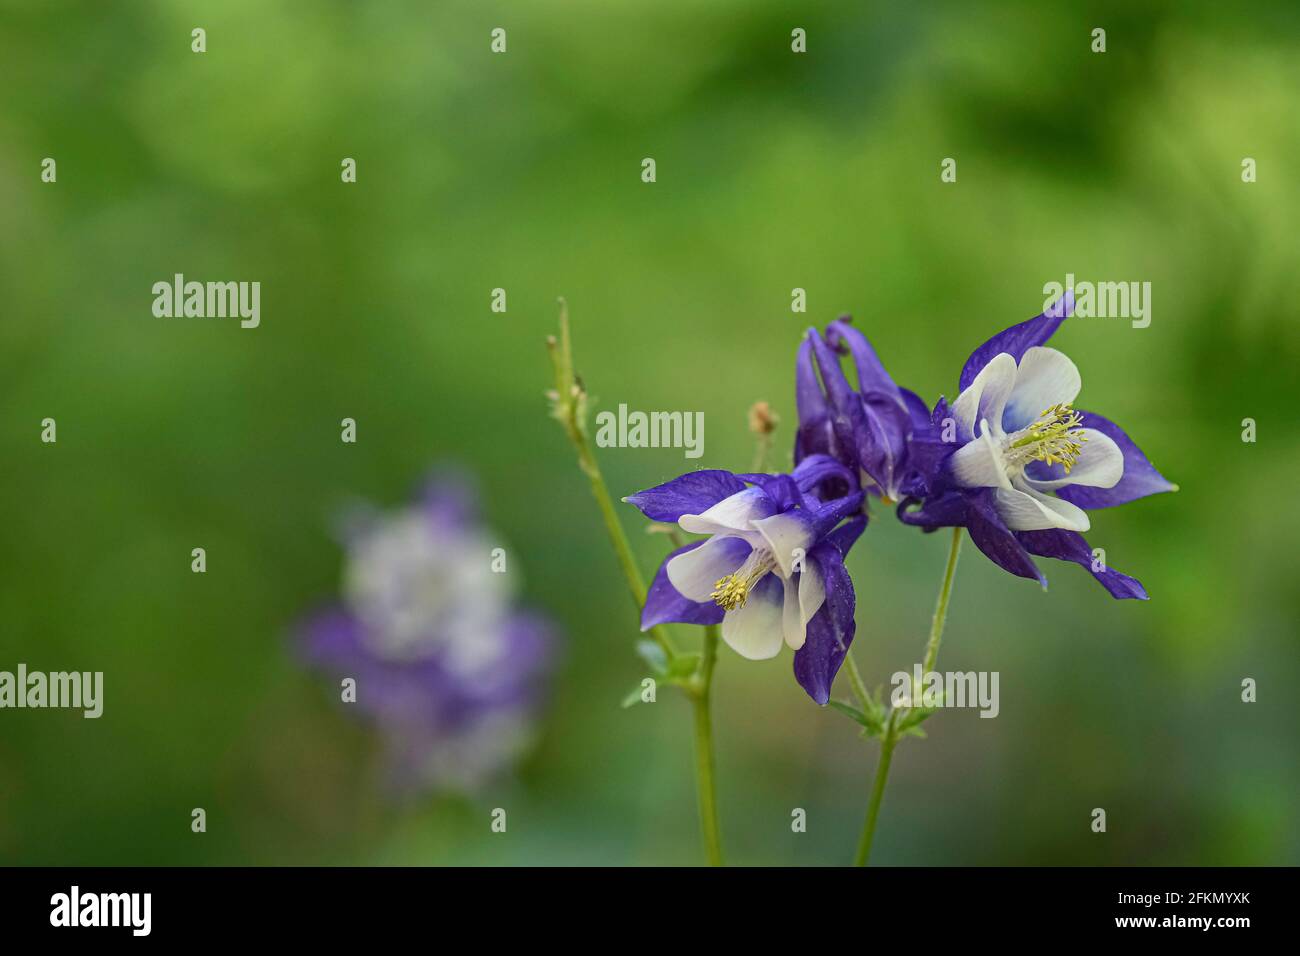 Purple and white Columbine (Aquilegia flabellata) flowers with a green bokeh background and negative space Stock Photo